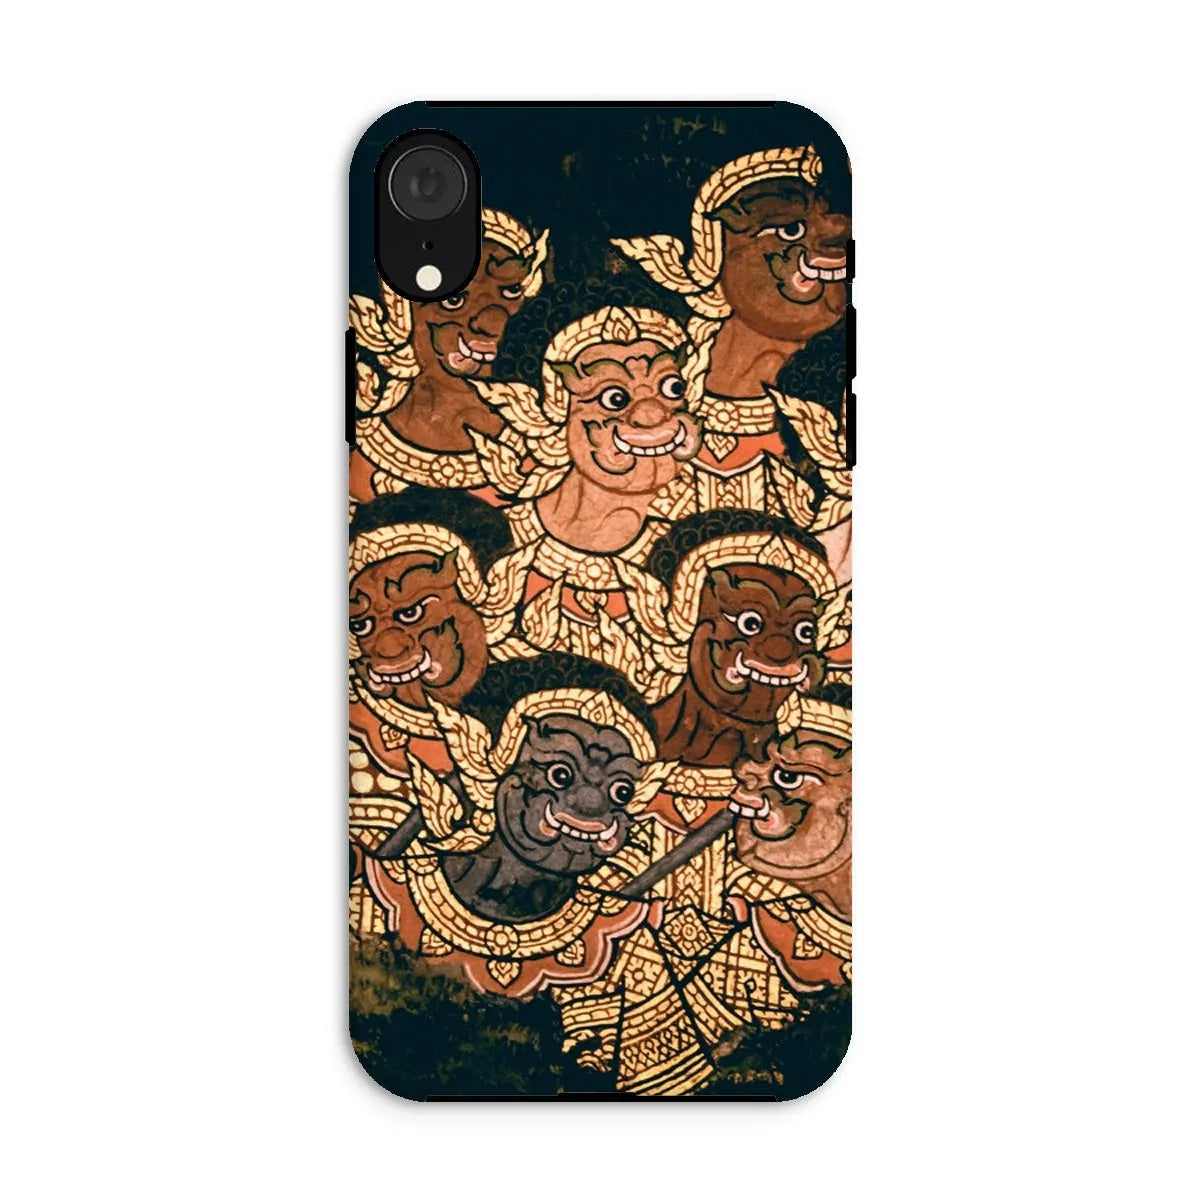 Babes In The Woods - Thailand Aesthetic Art Phone Case - Iphone Xr / Matte - Mobile Phone Cases - Aesthetic Art